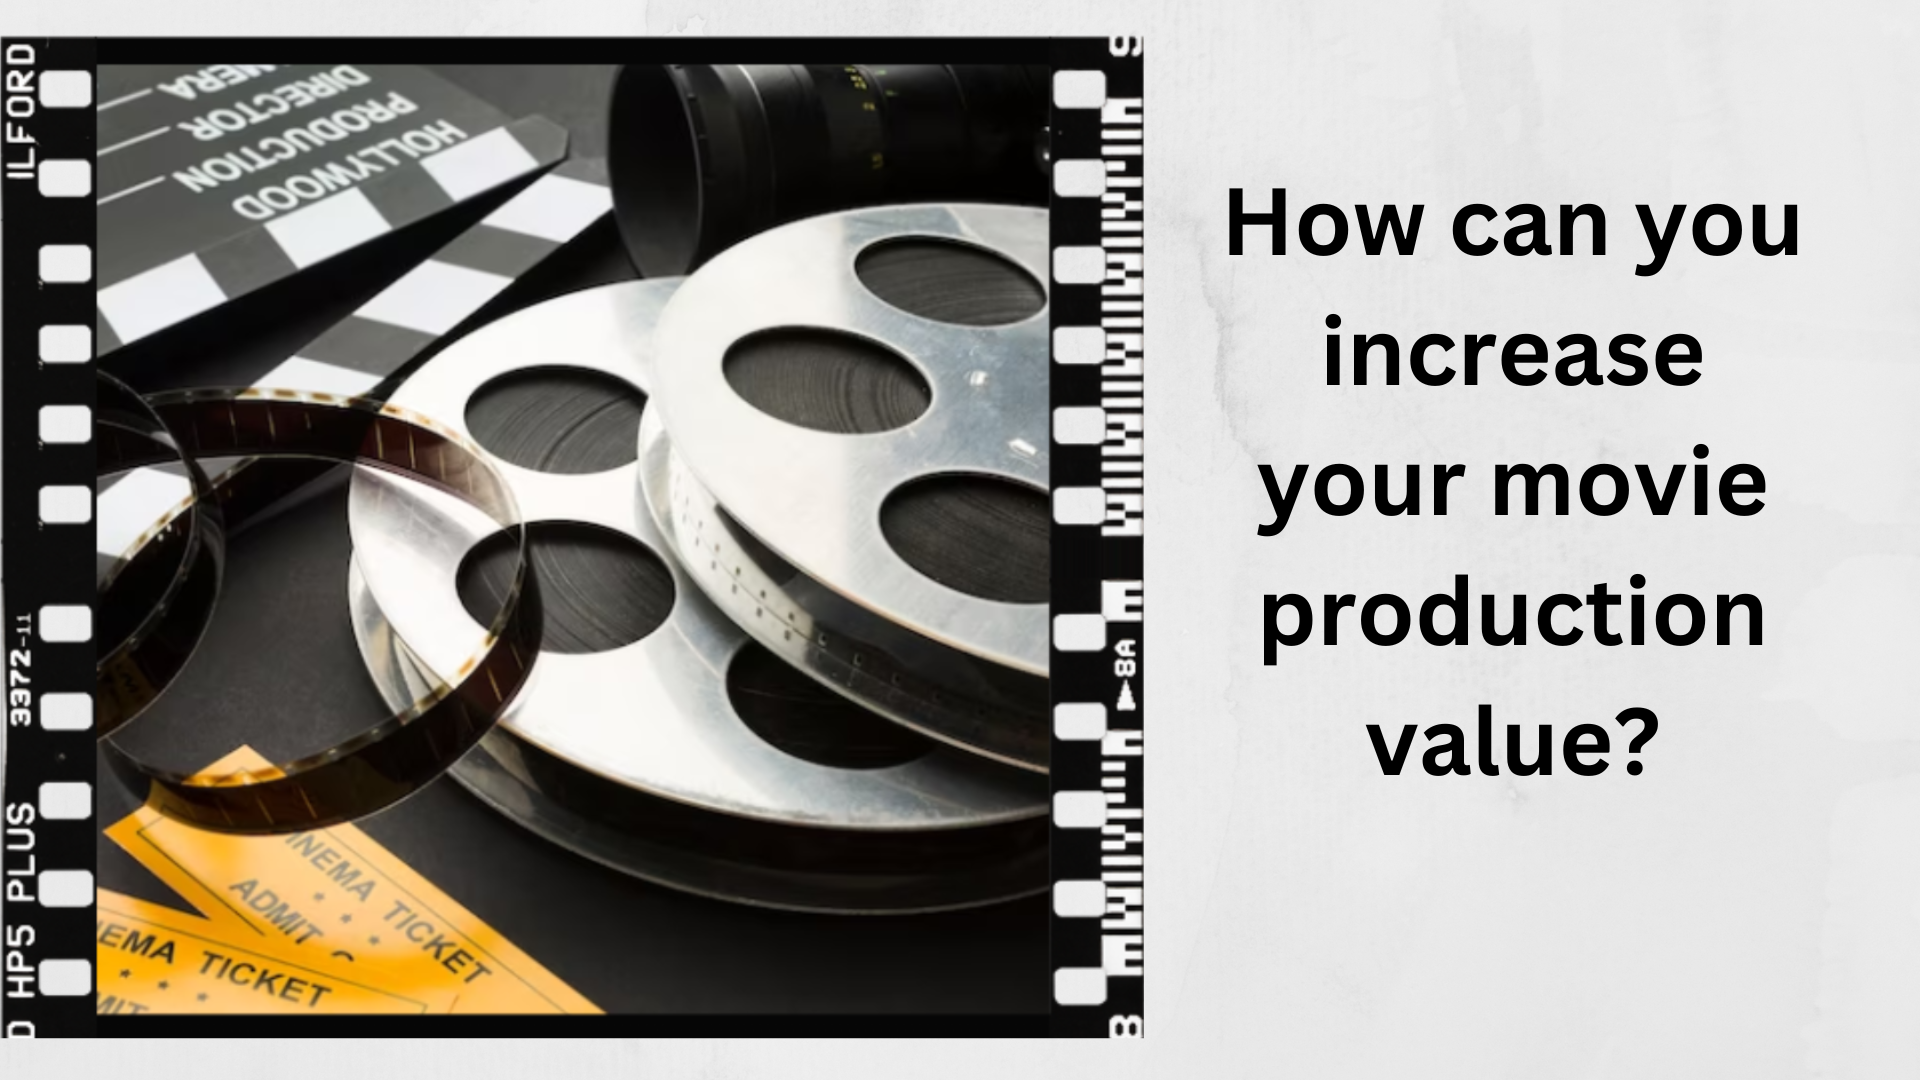 How can you increase your movie production value?